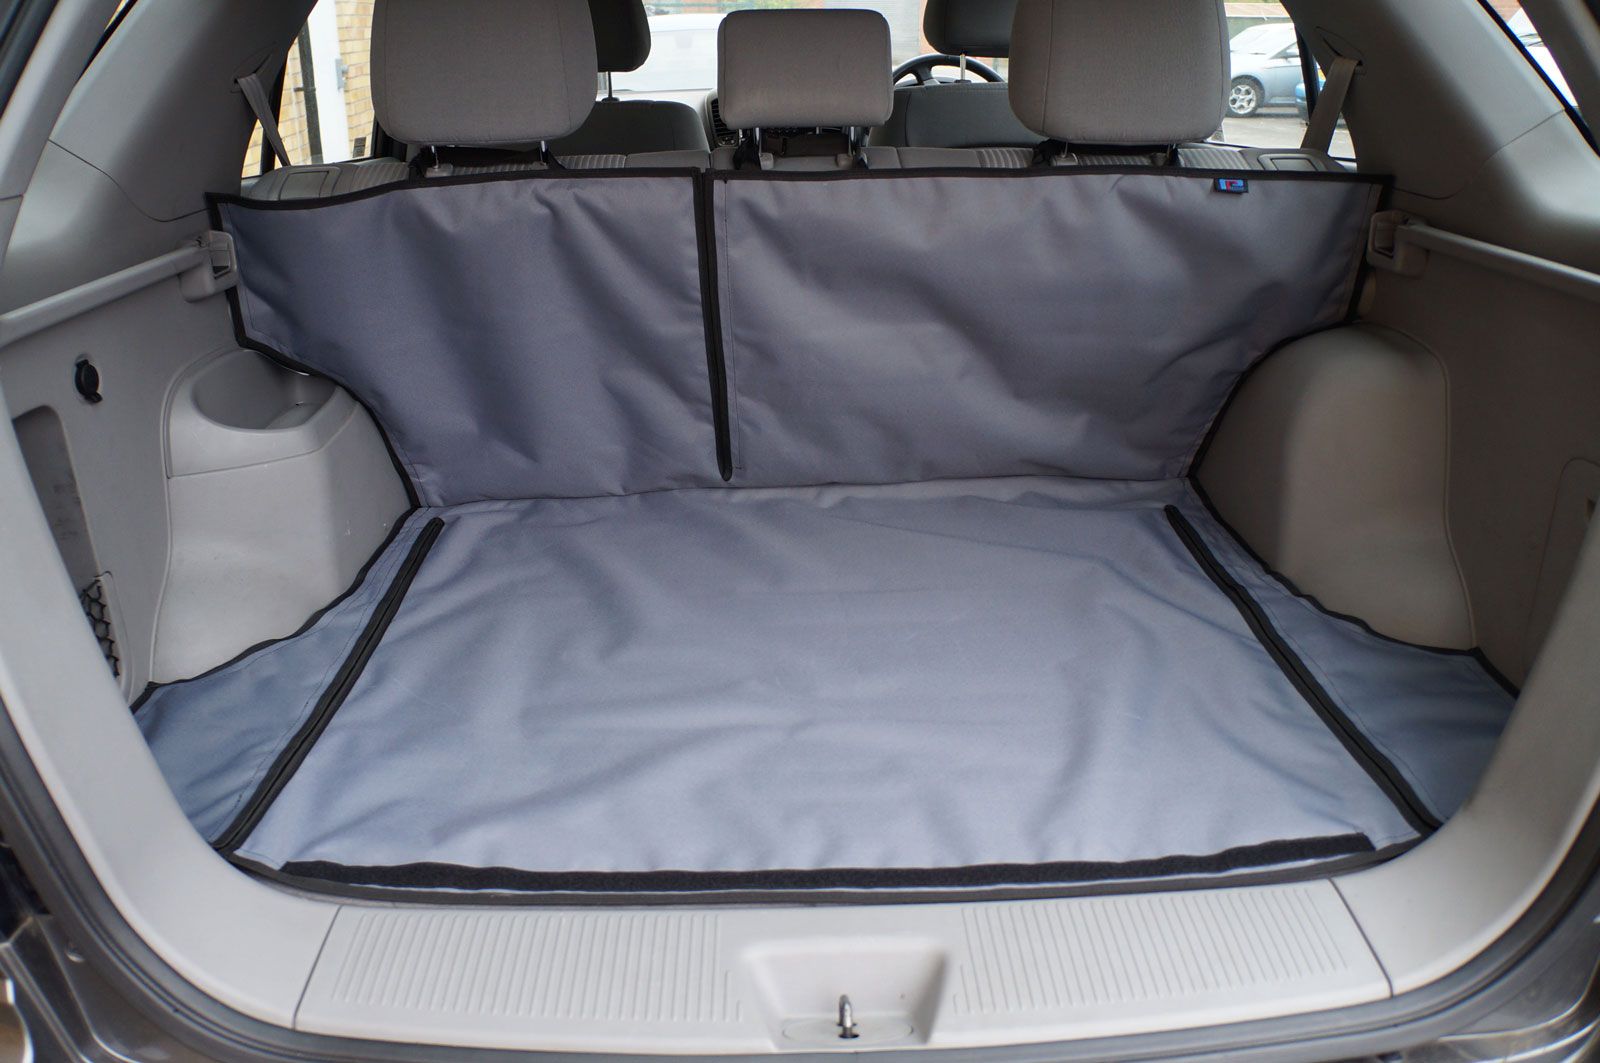 Tesla Model X (5 seats in use) 2016 Fully Tailored Load Liner without bumper flap - Example